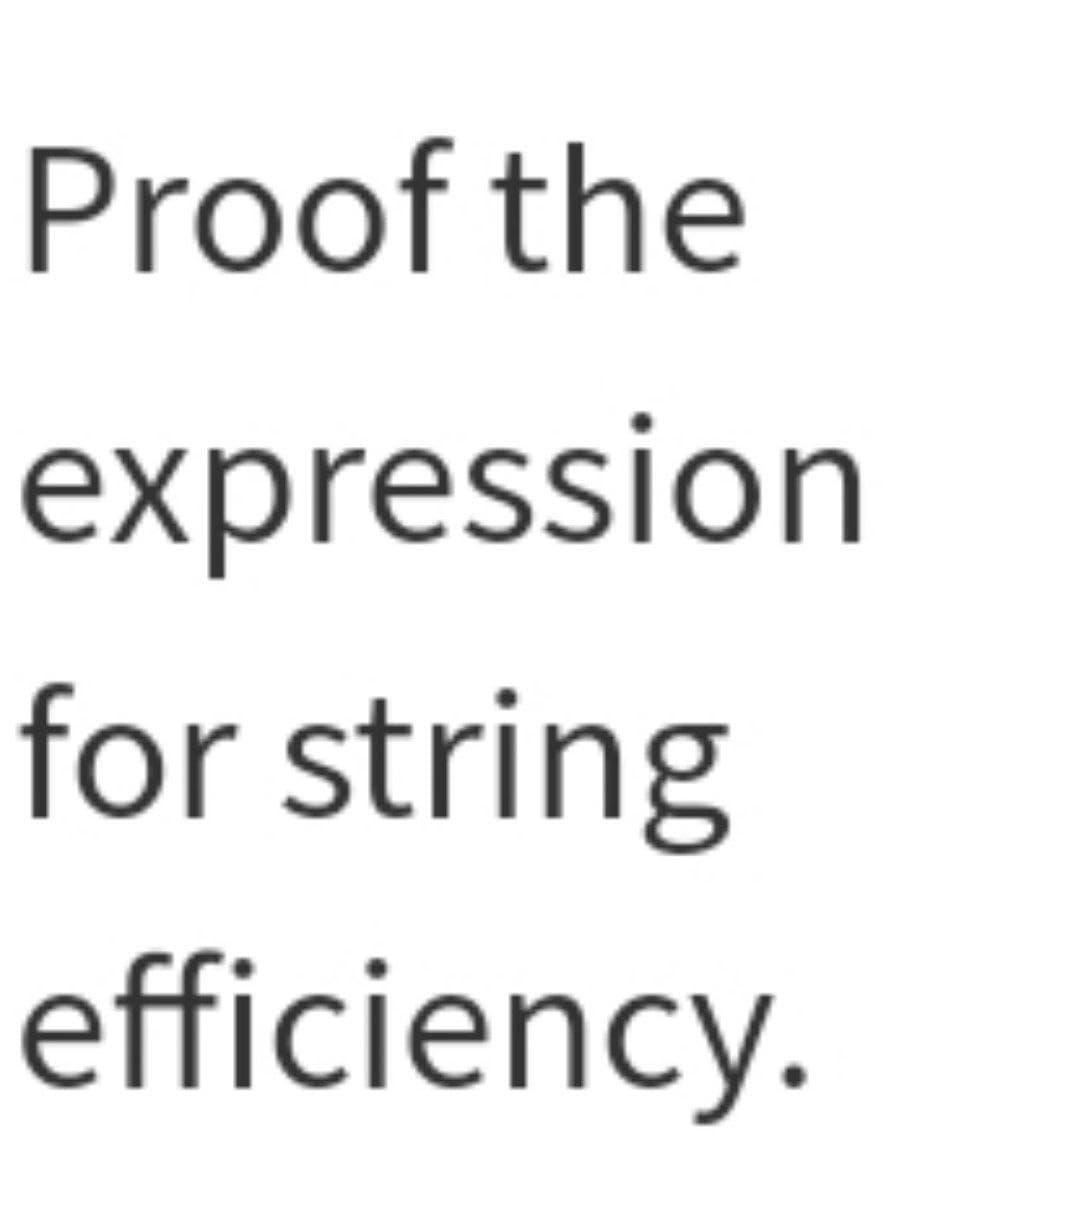 Proof the
expression
for string
efficiency.
